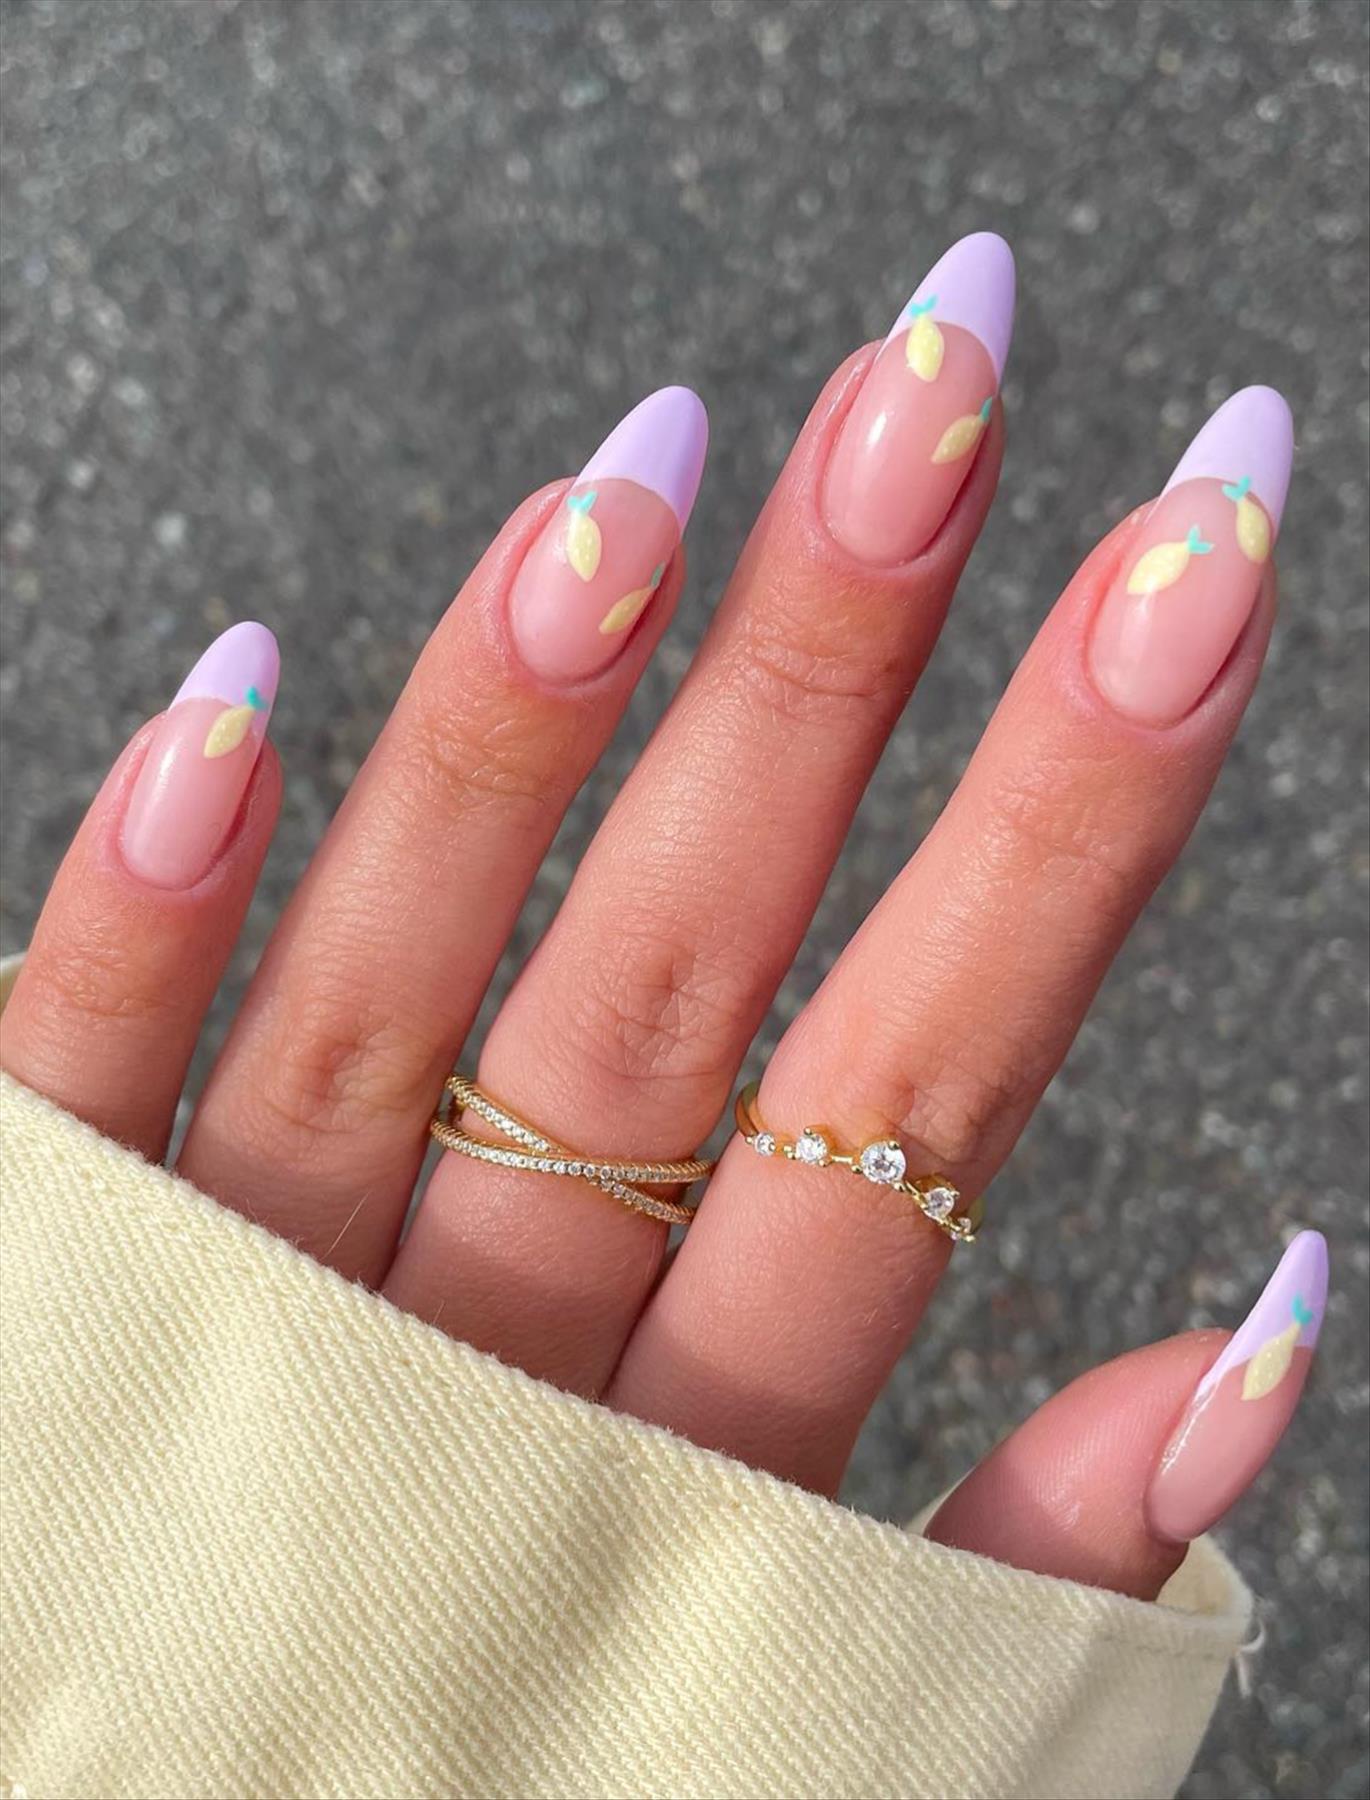 Best French tip nails for Summer mani 2022